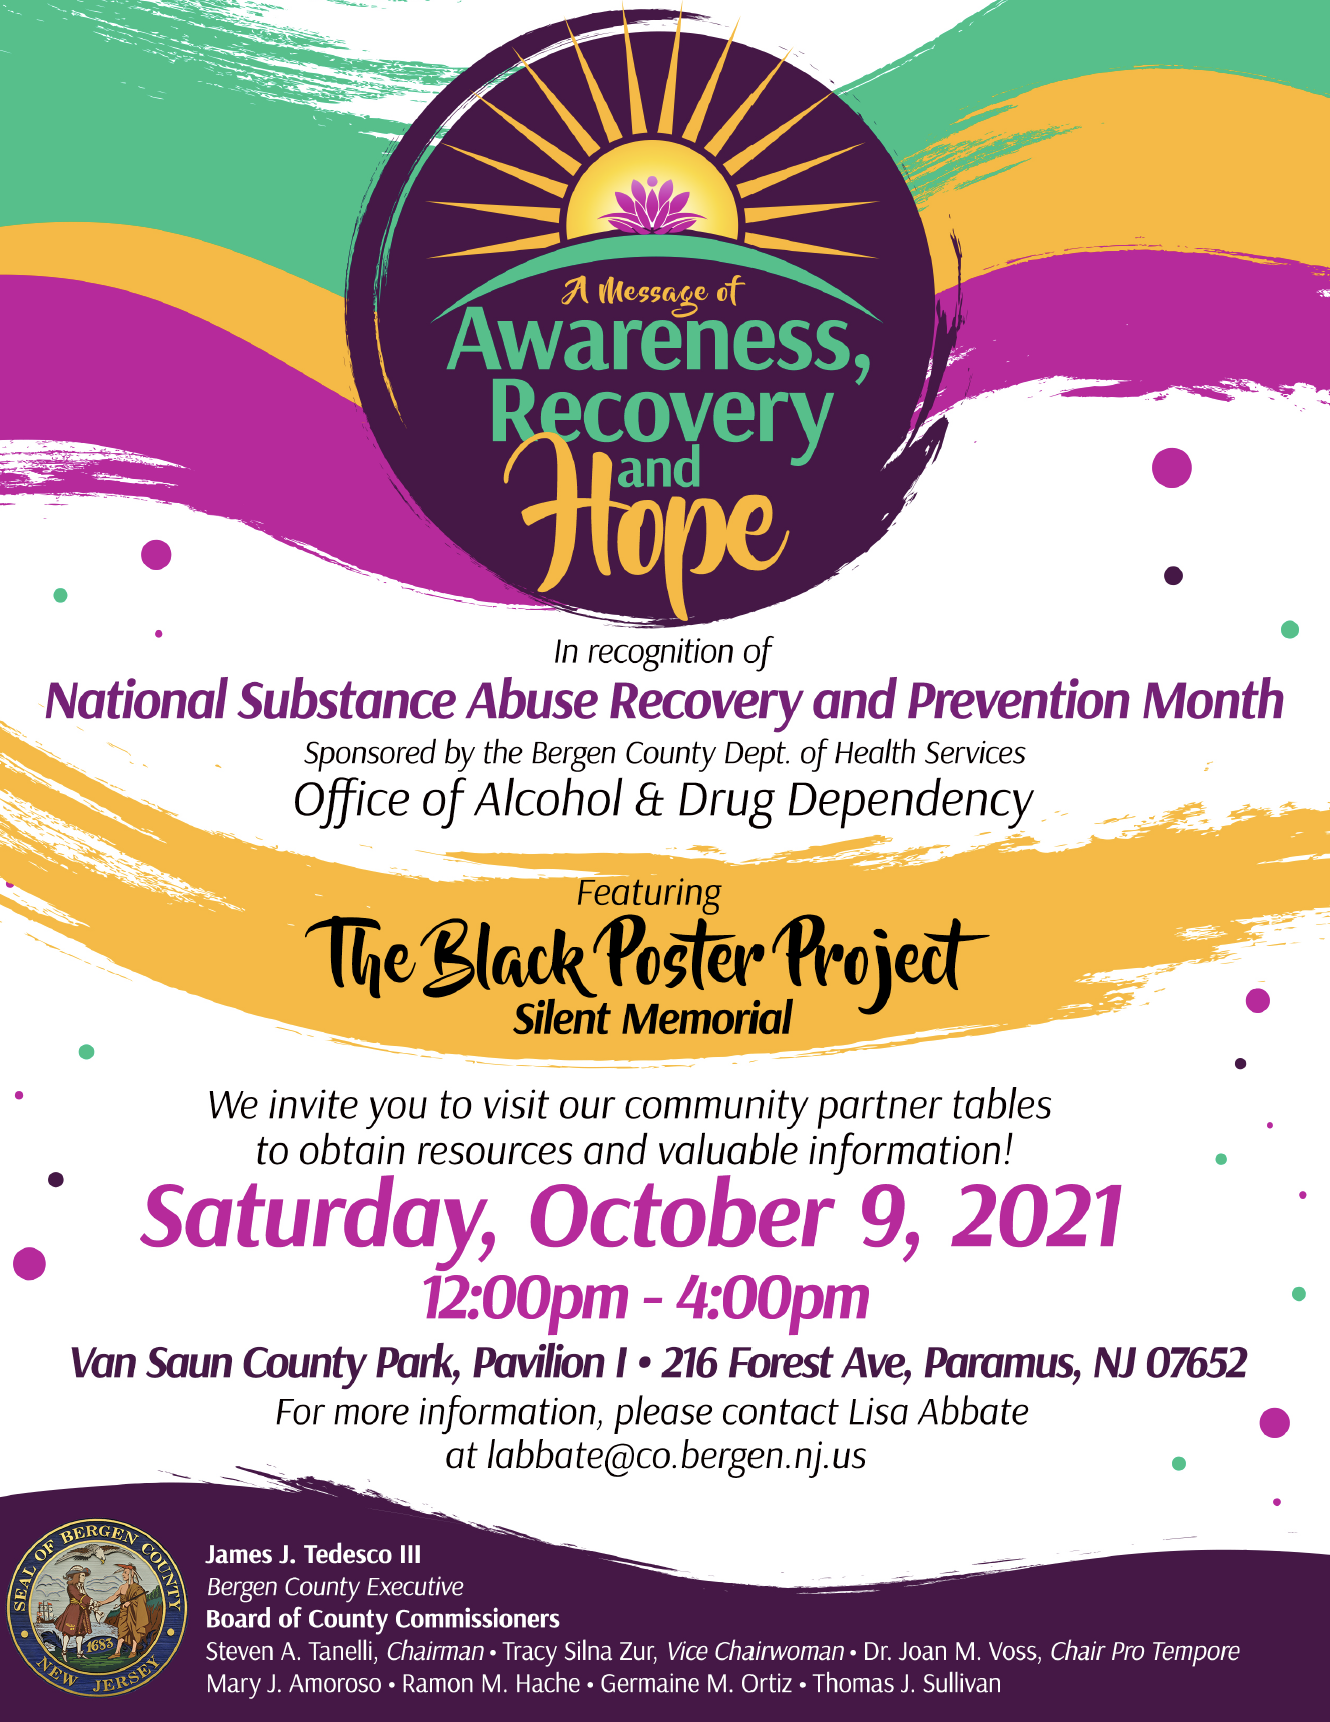 National Substance and Abuse Recovery and Prevention Event